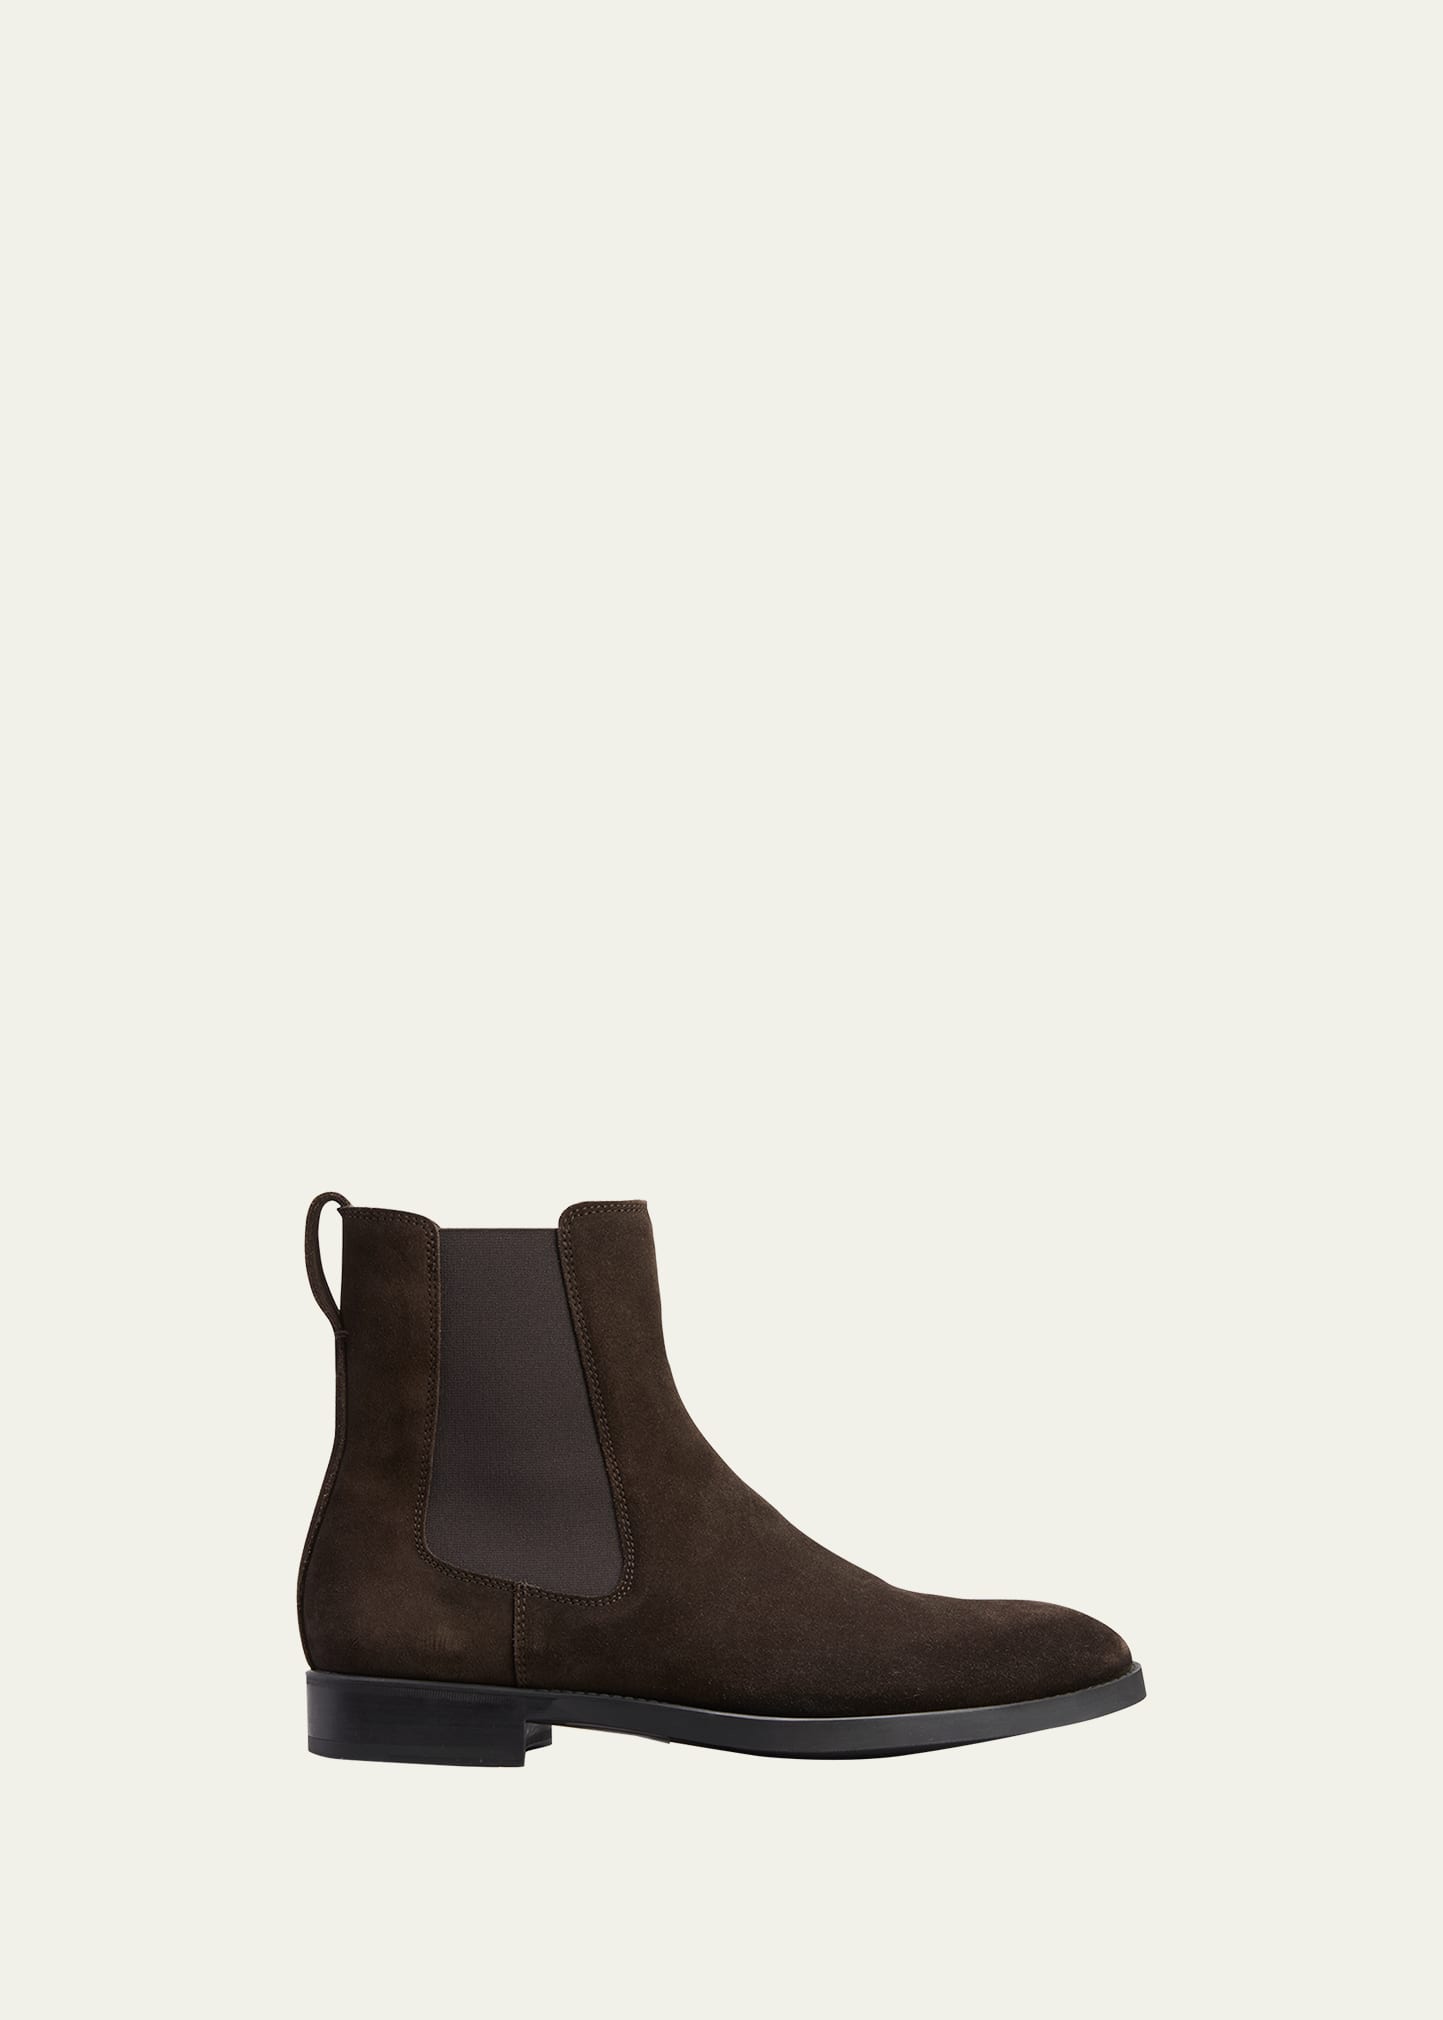 Tom Ford Robert Suede Chelsea Boots In Chocolate